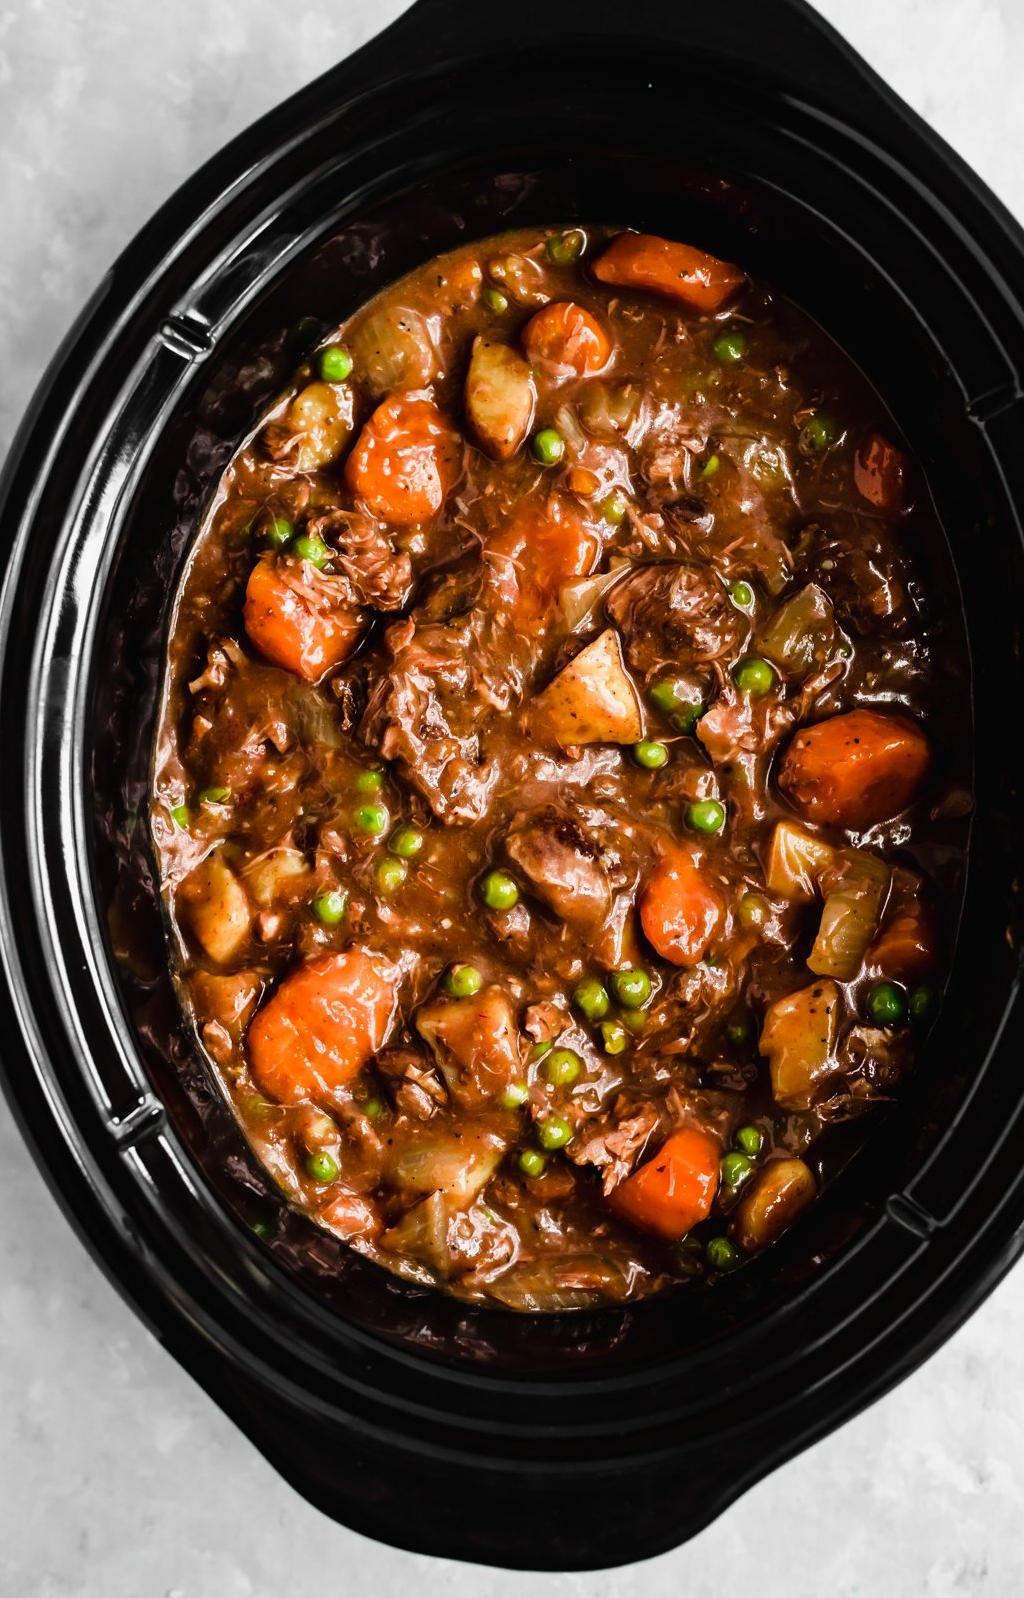  Rich flavors and tender meat make this stew a crowd-pleaser.